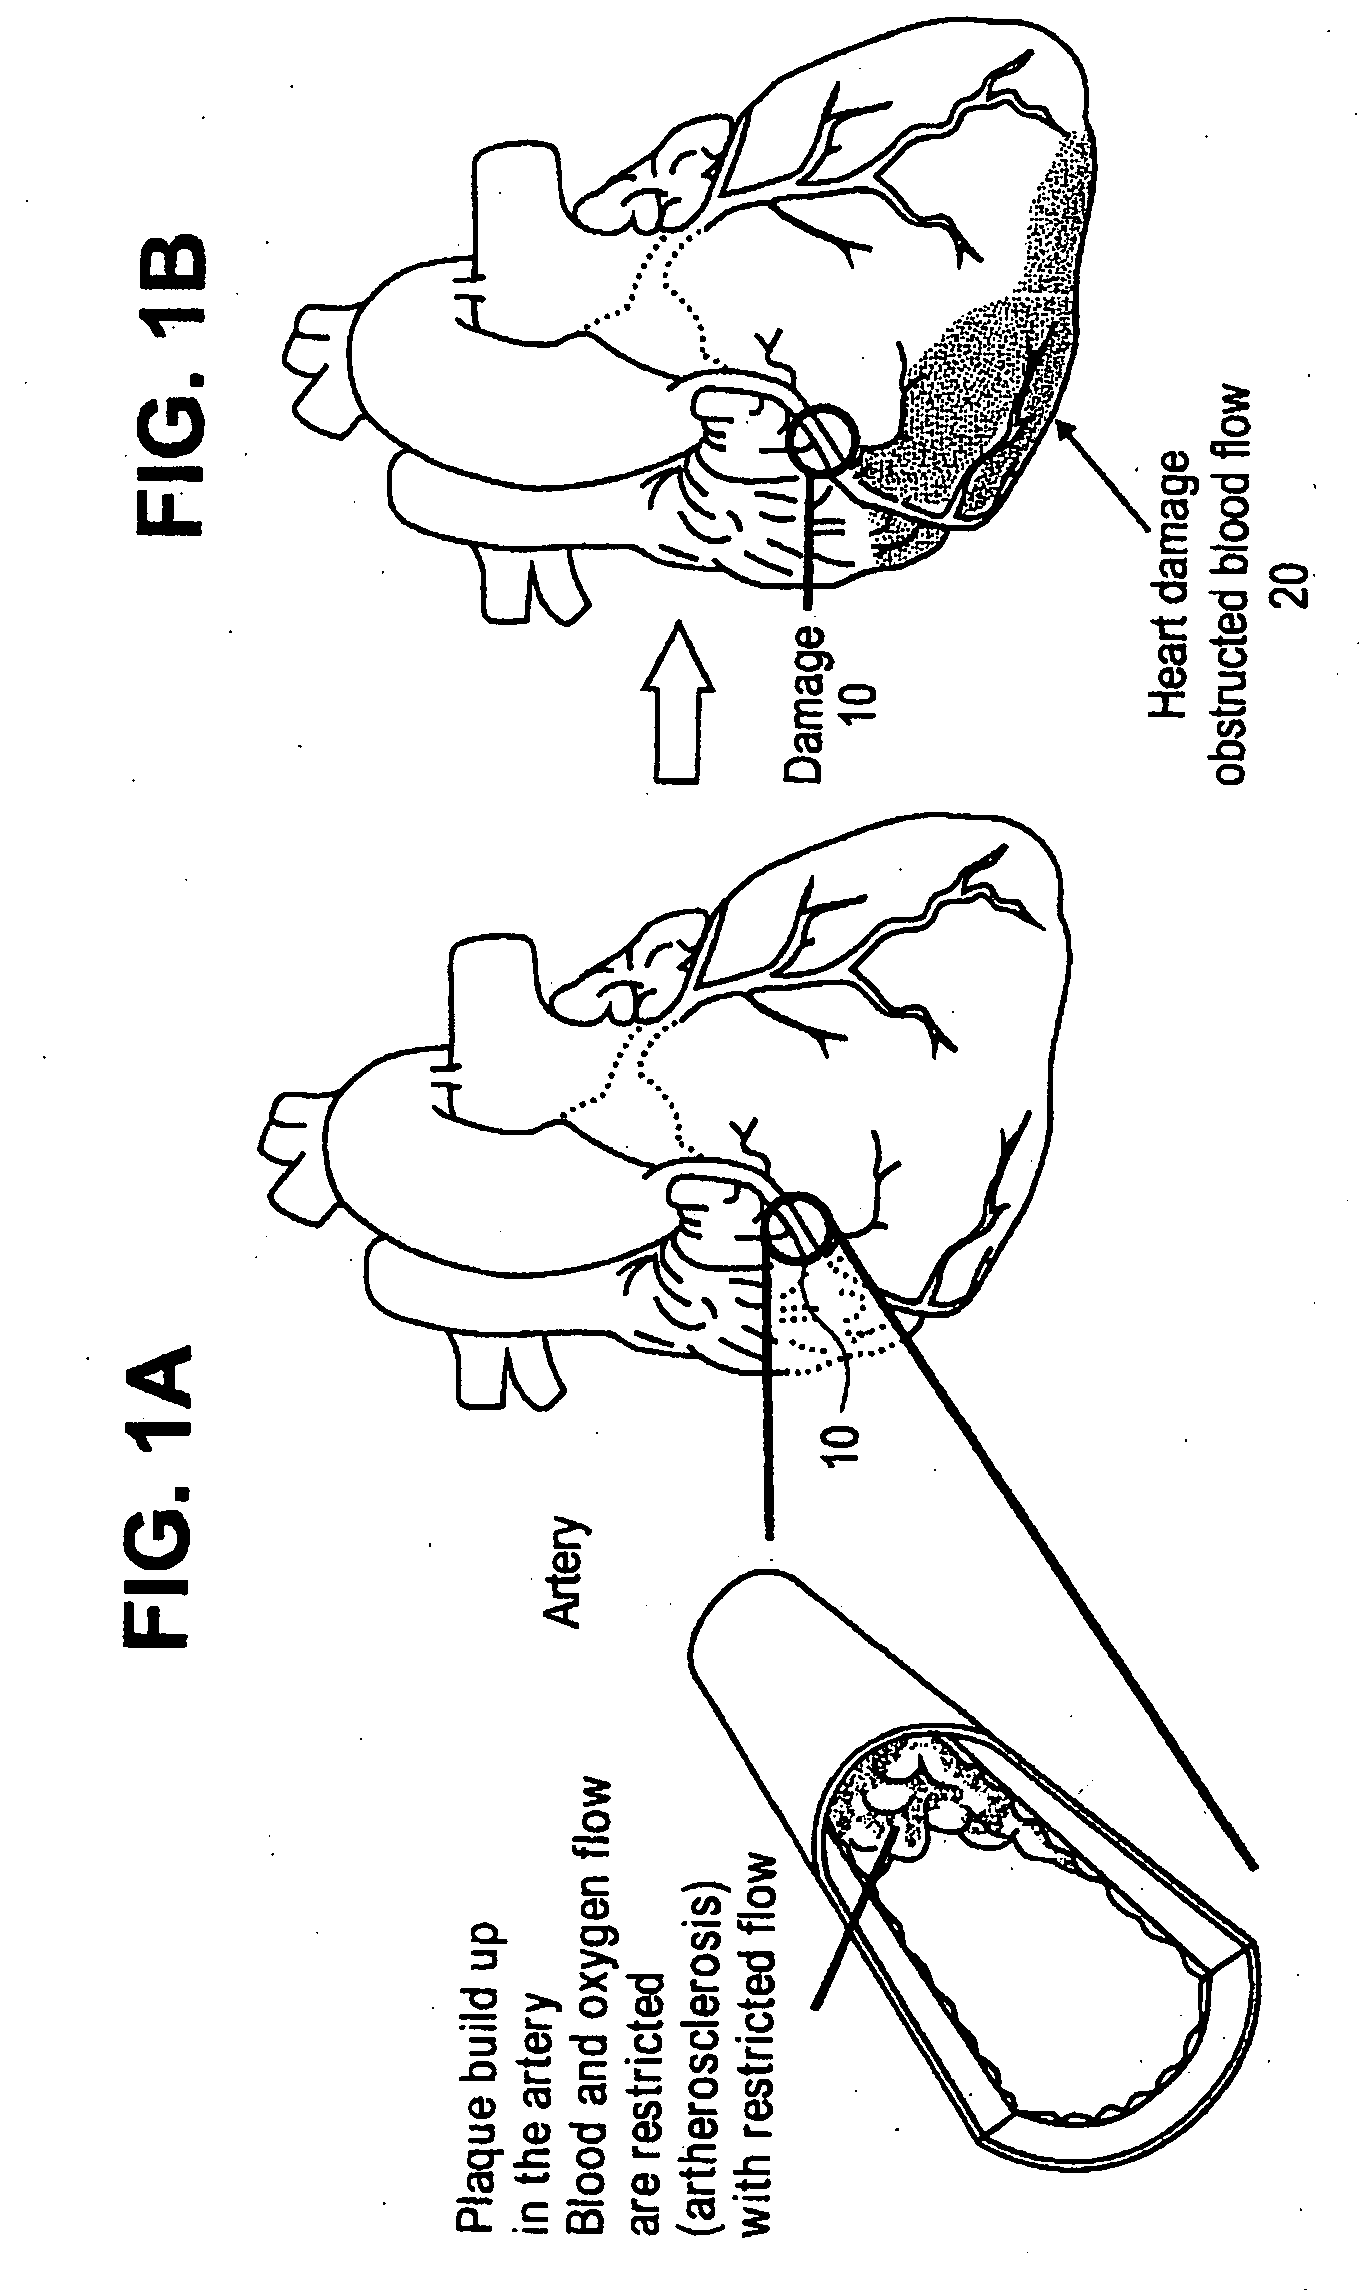 Methods and compositions for treating post-cardial infarction damage